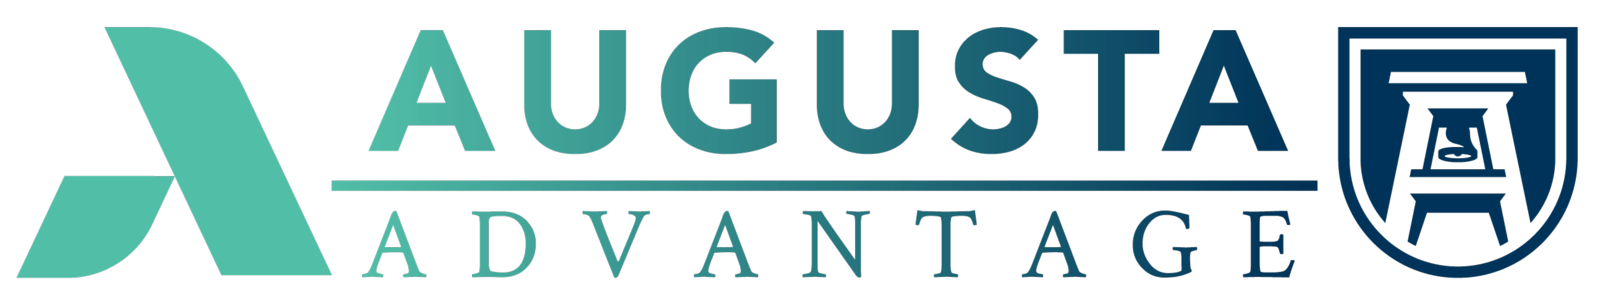 Augusta Advantage logo composed of the Augusta Technical College A icon in mint green on the left with the words Augusta Advantage in the center divided by a horizontal line followed by the Augusta University icon in Navy blue on the right. The whole logo transitions from mint green to Navy blue as you read from left to right.